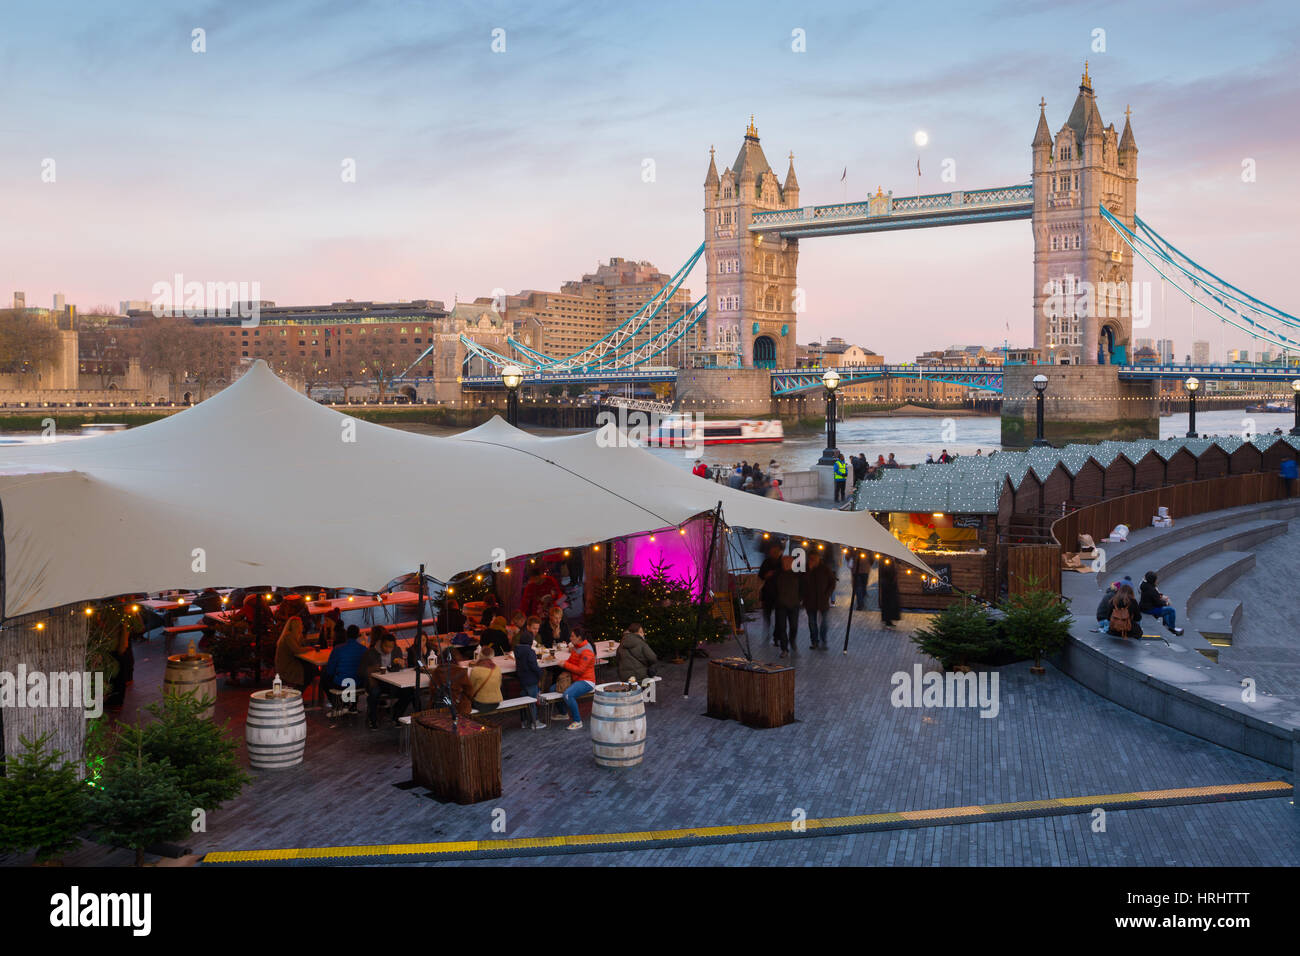 Christmas Market, The Scoop and Tower Bridge, South Bank, London, England, United Kingdom Stock Photo